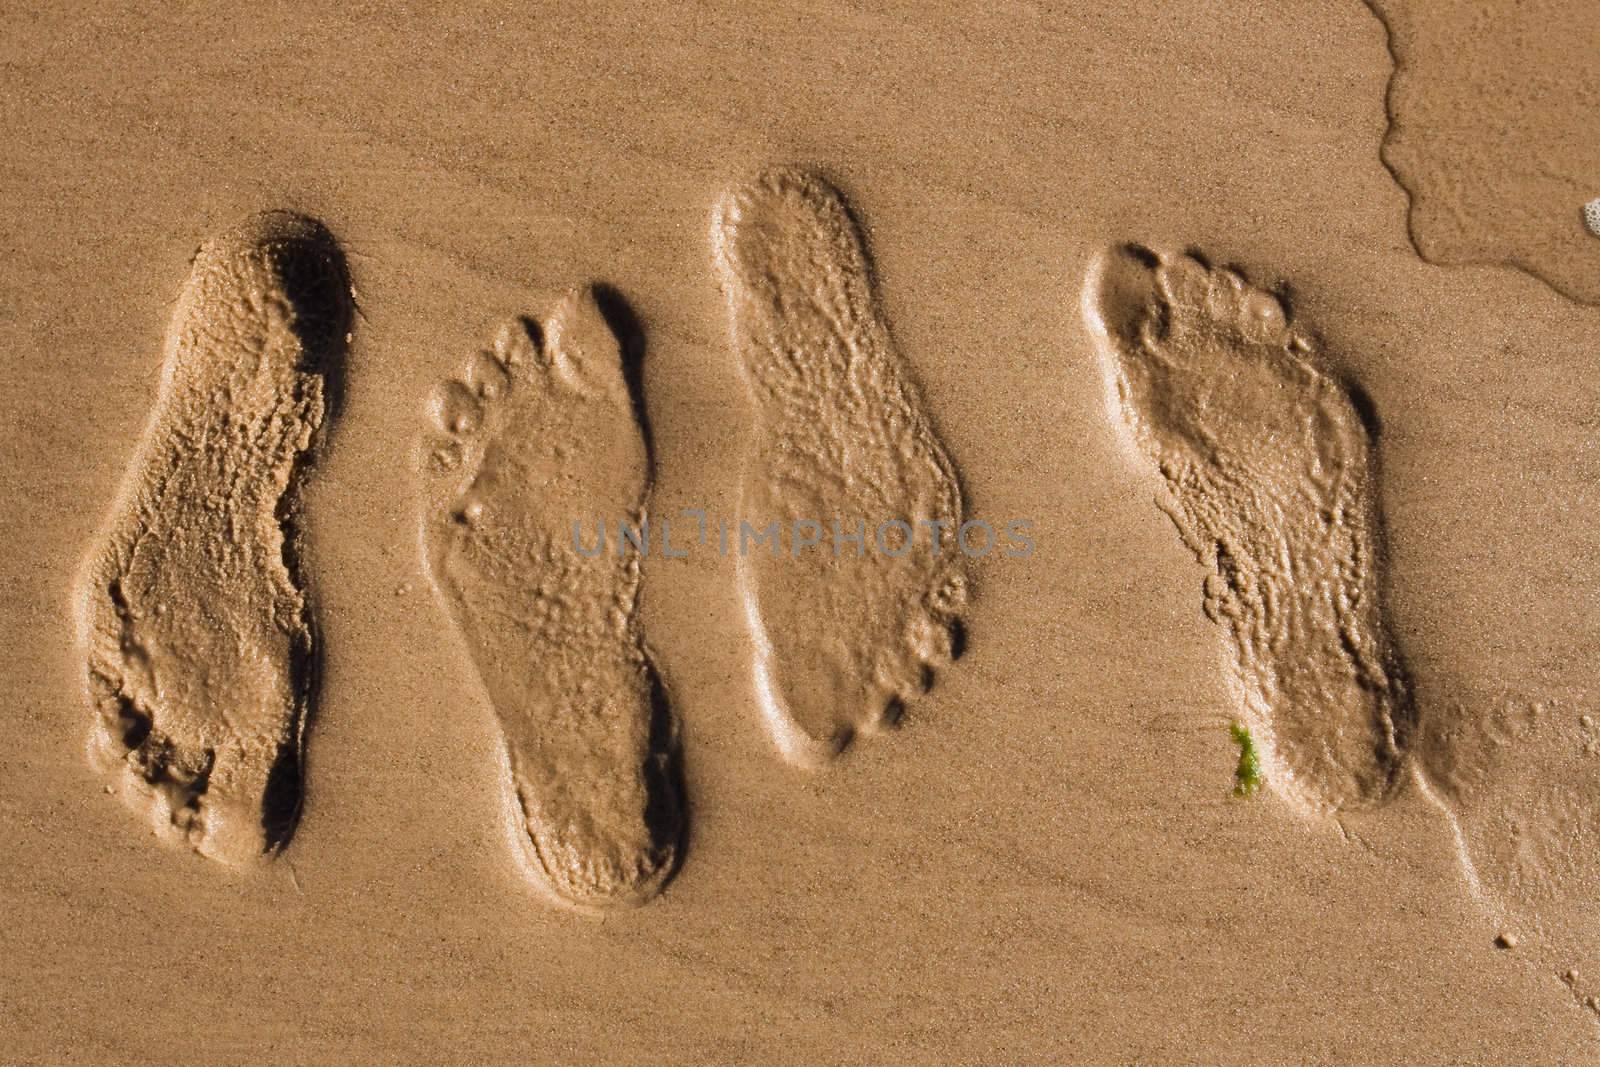 Footprints in sand by ints